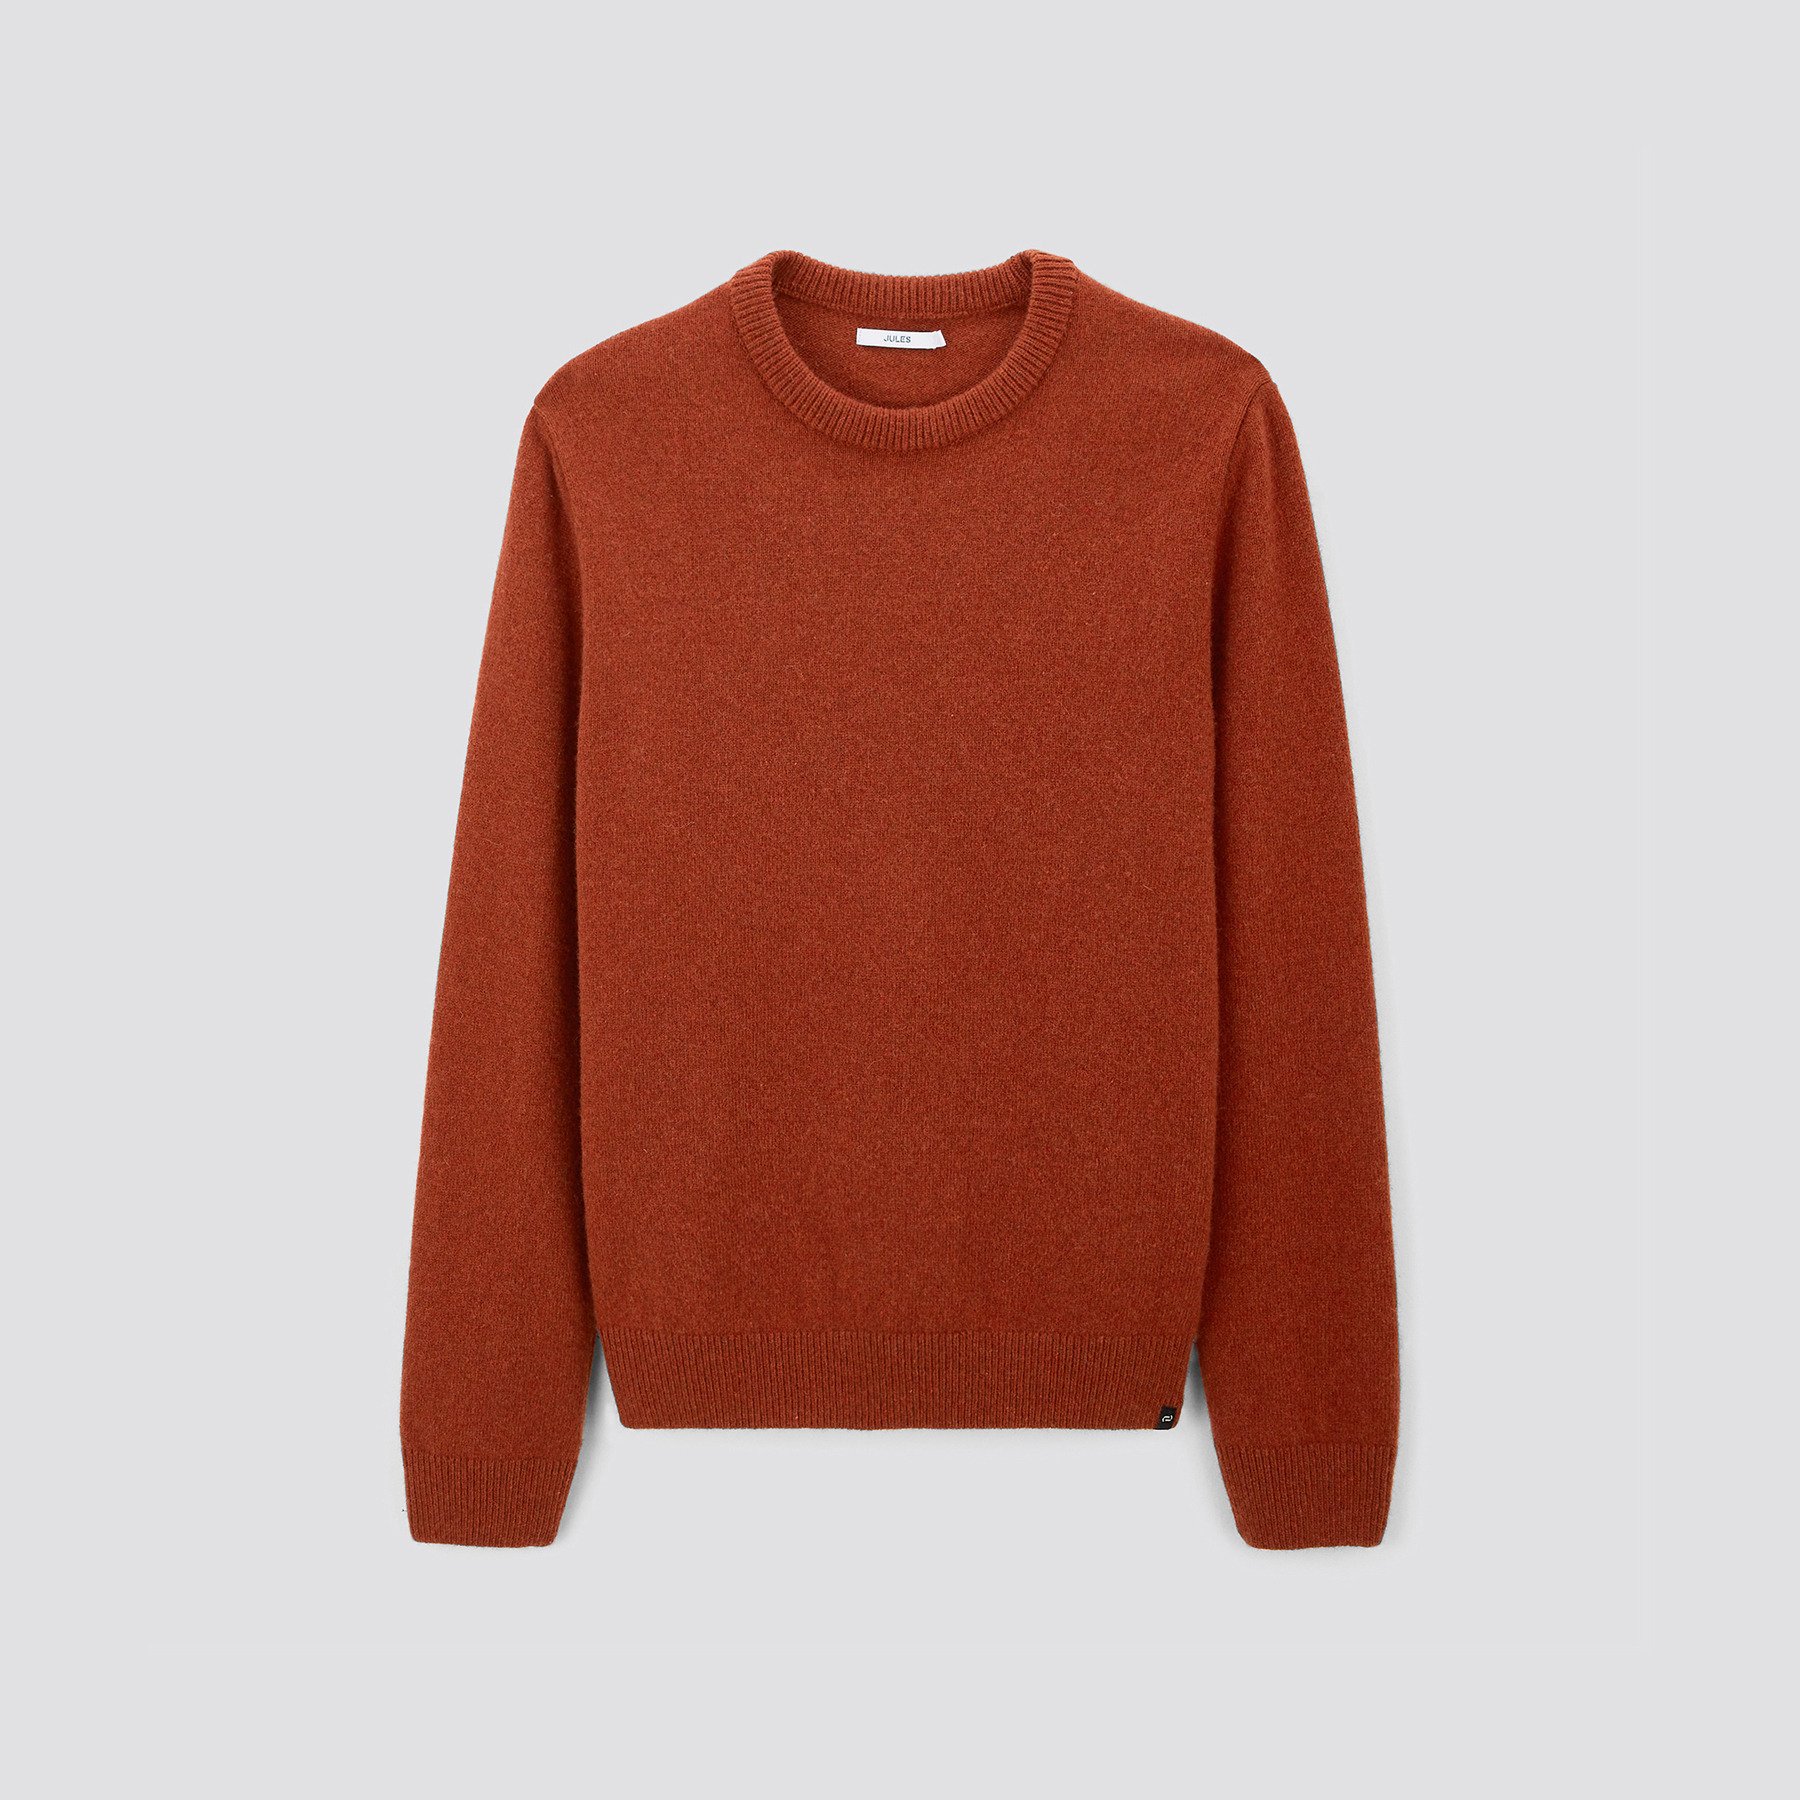 Pull à col rond uni Orange S 63% Laine, 29% Polyamide, 6% ACRYLIC, 2% Polyester Homme